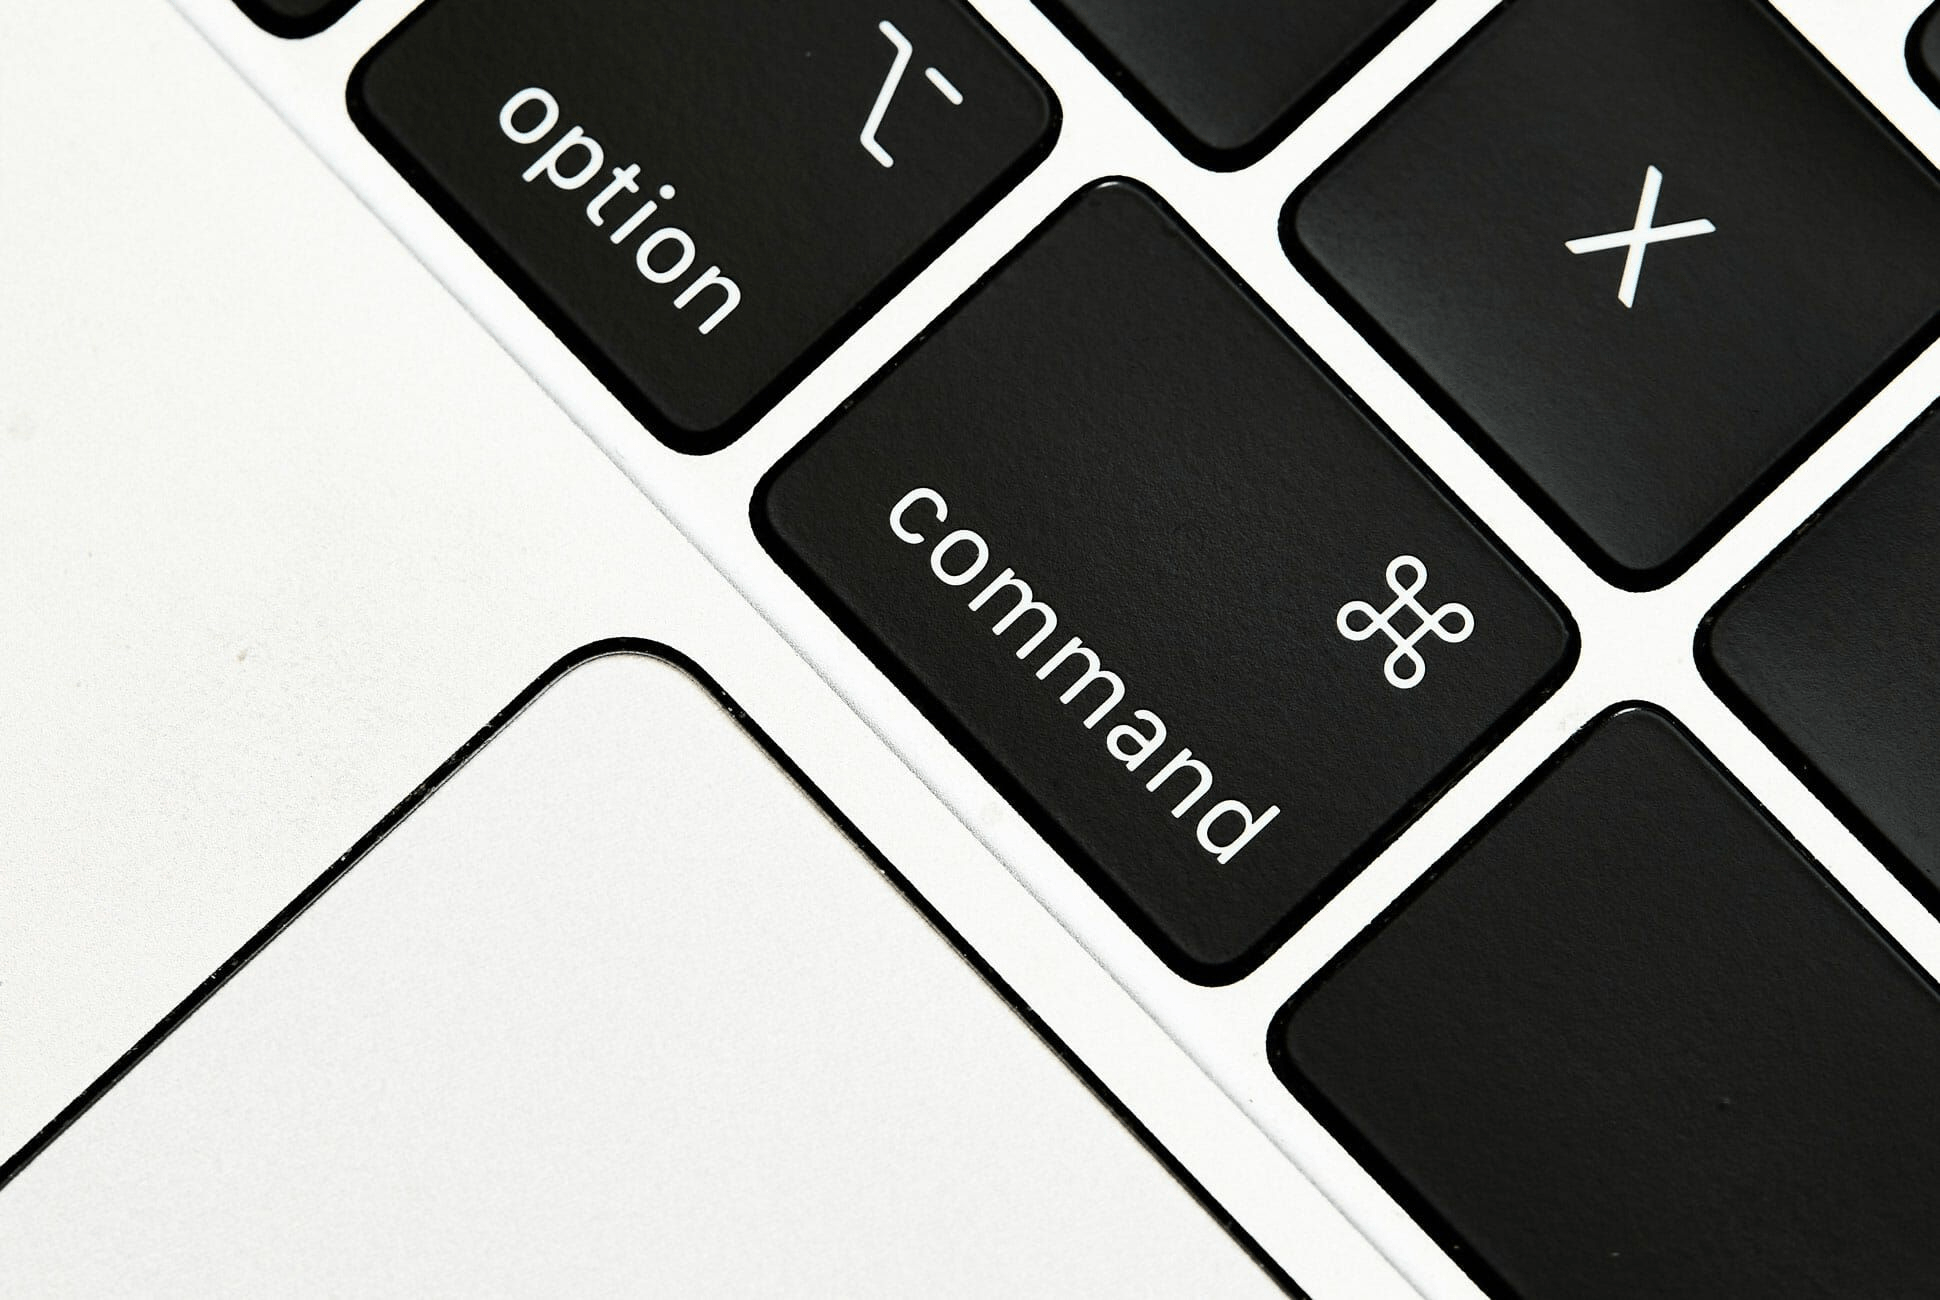 Apple Command button on a keyboard